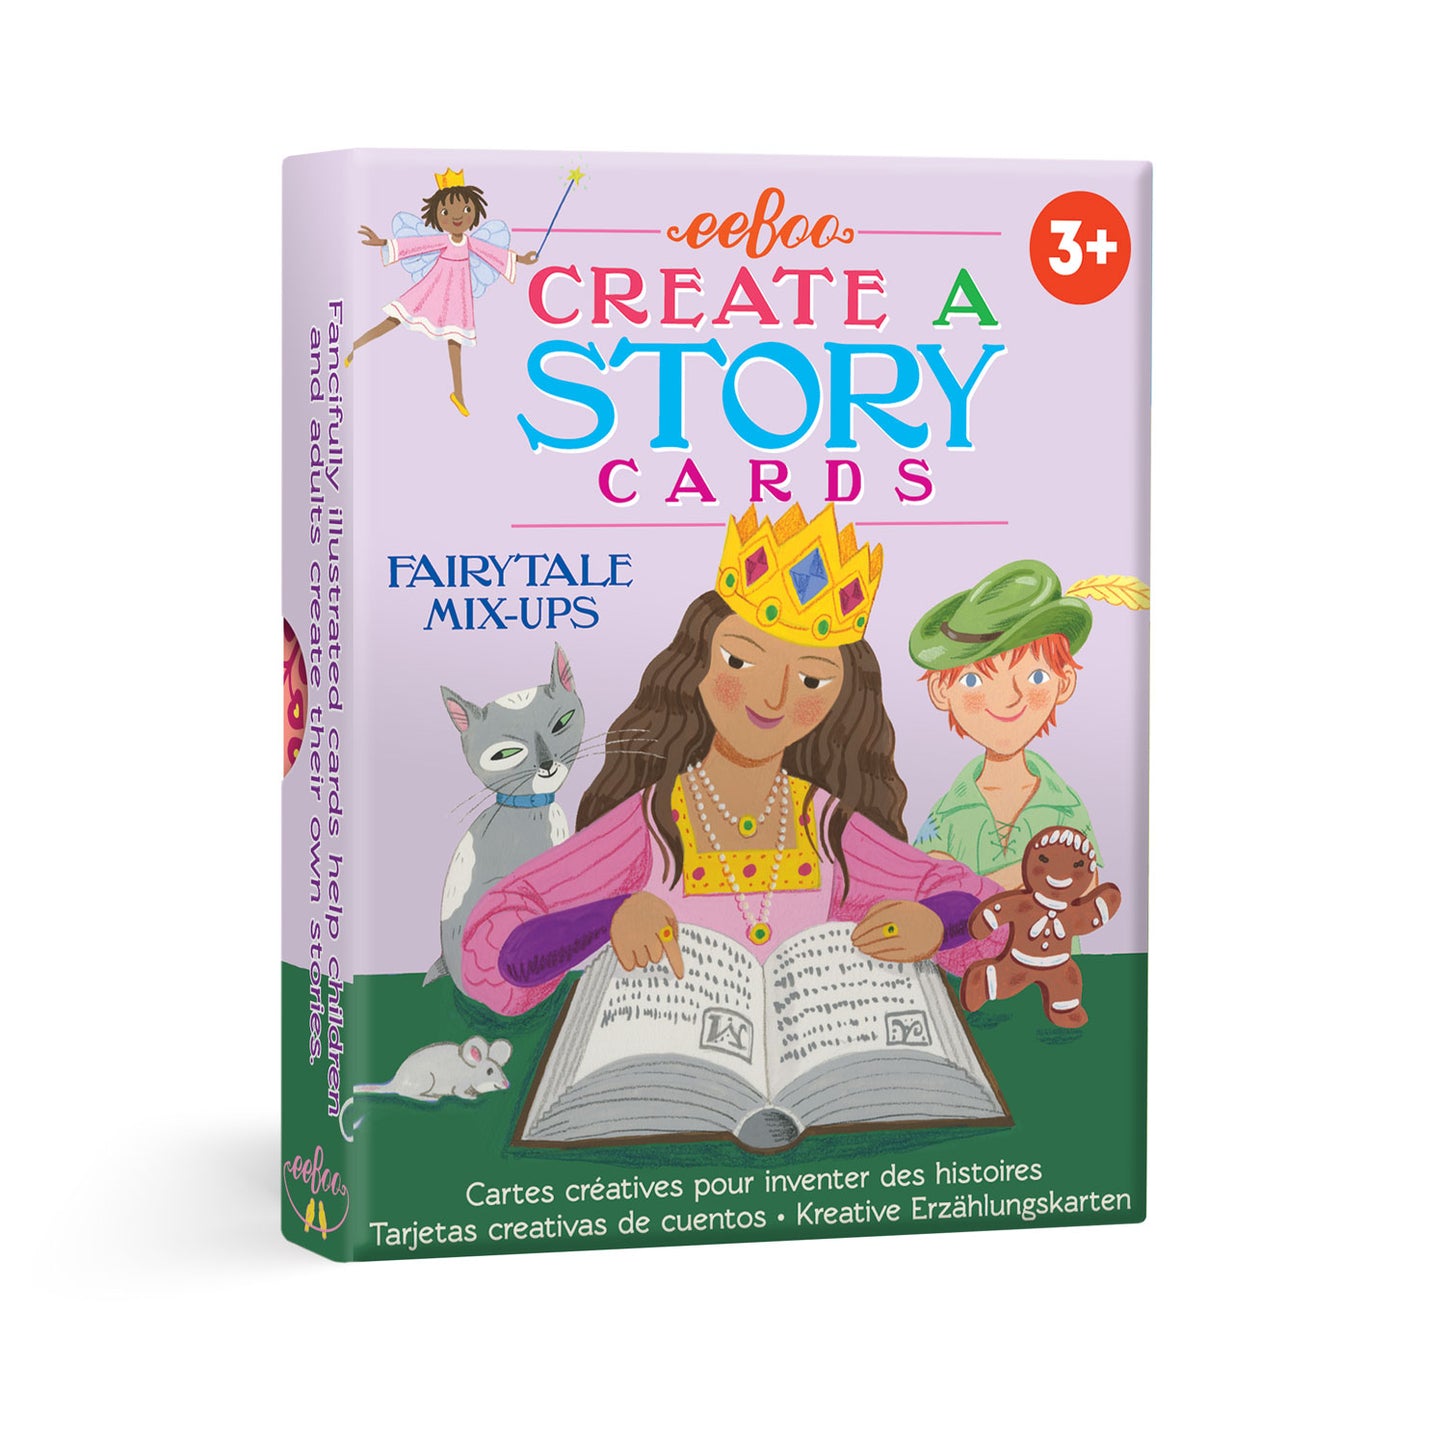 Fairytale Mix Ups Award Winning Create and Tell Me A Story Cards eeBoo for Kids Ages 3+